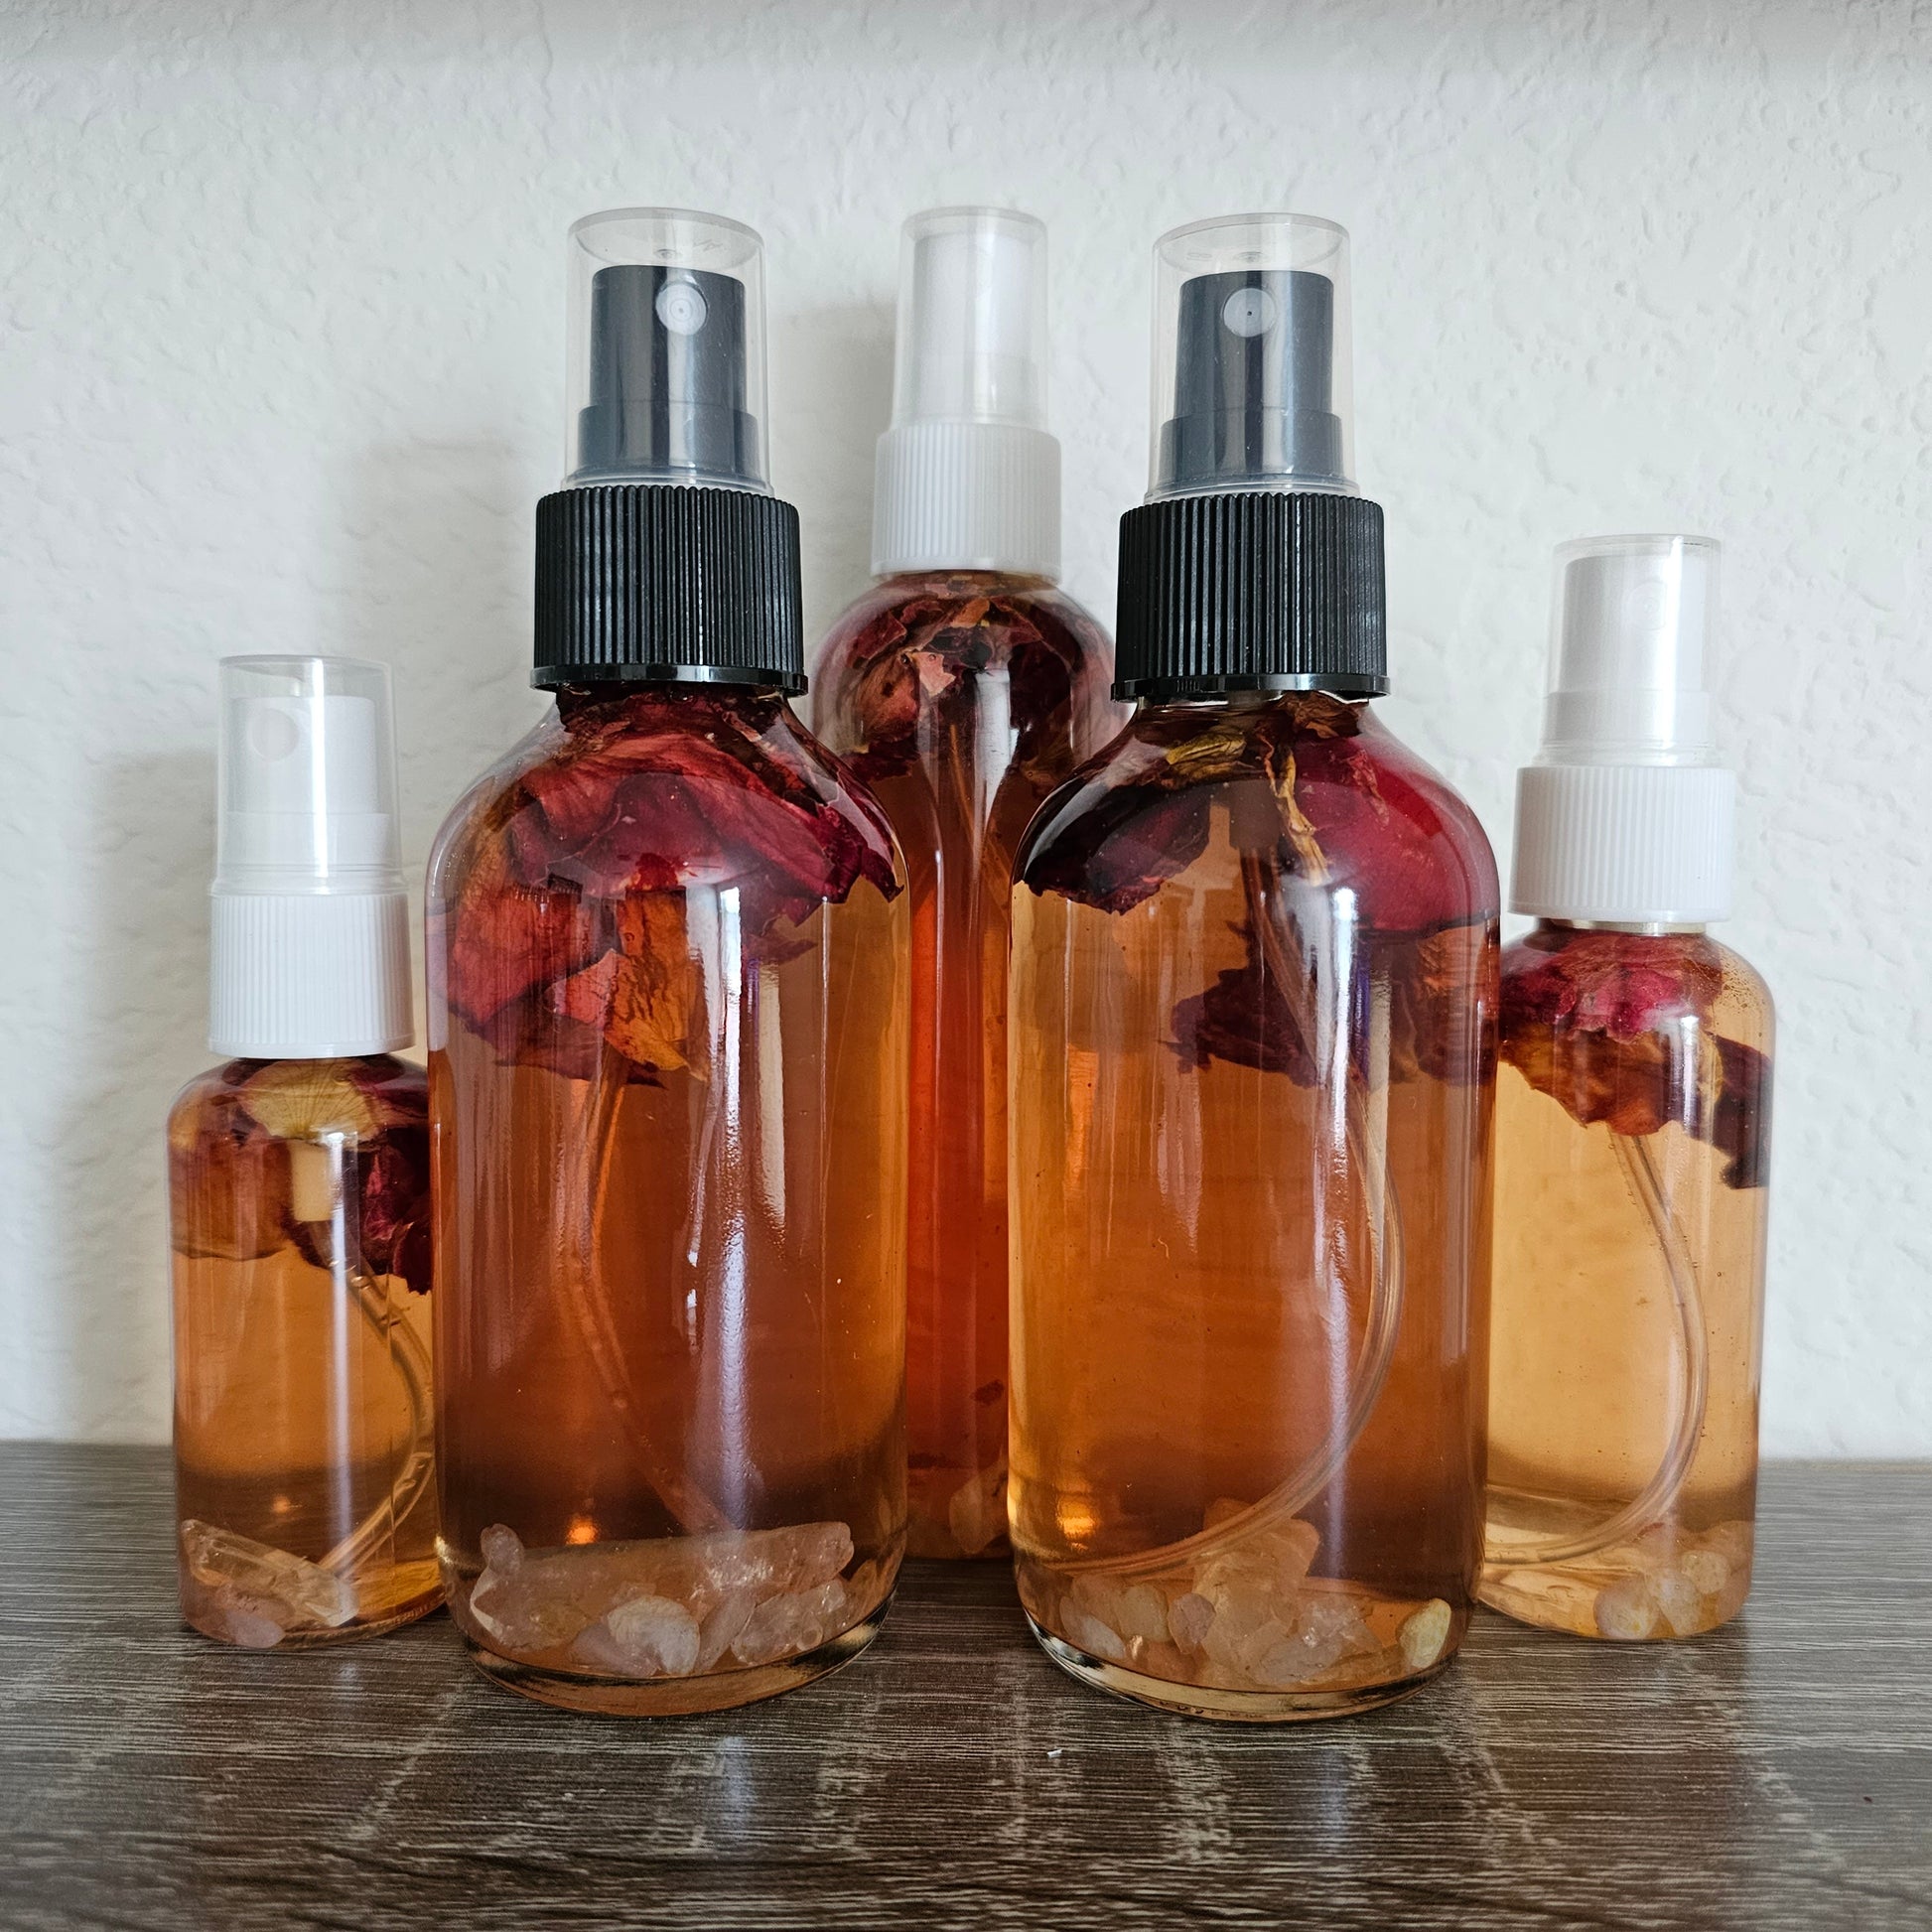 RED ROSE WATER Facial Mist - Red Rose and Crystal Infused - All Natural Rose Water Spray with Rose Absolute - Facial Toner & Spray